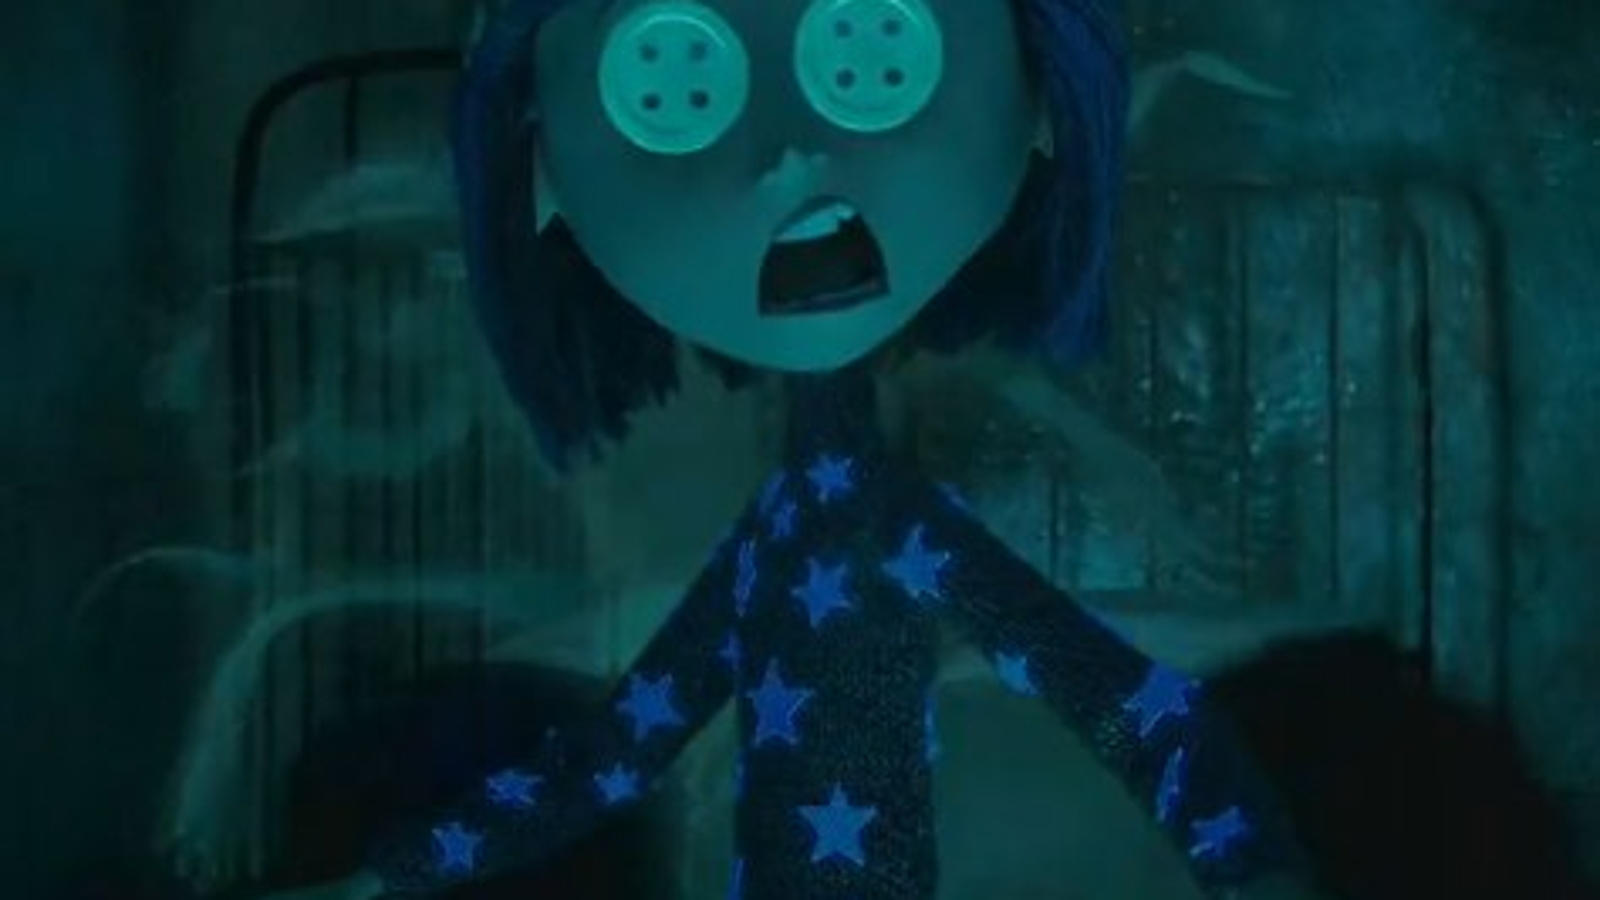 how long did it take to film coraline